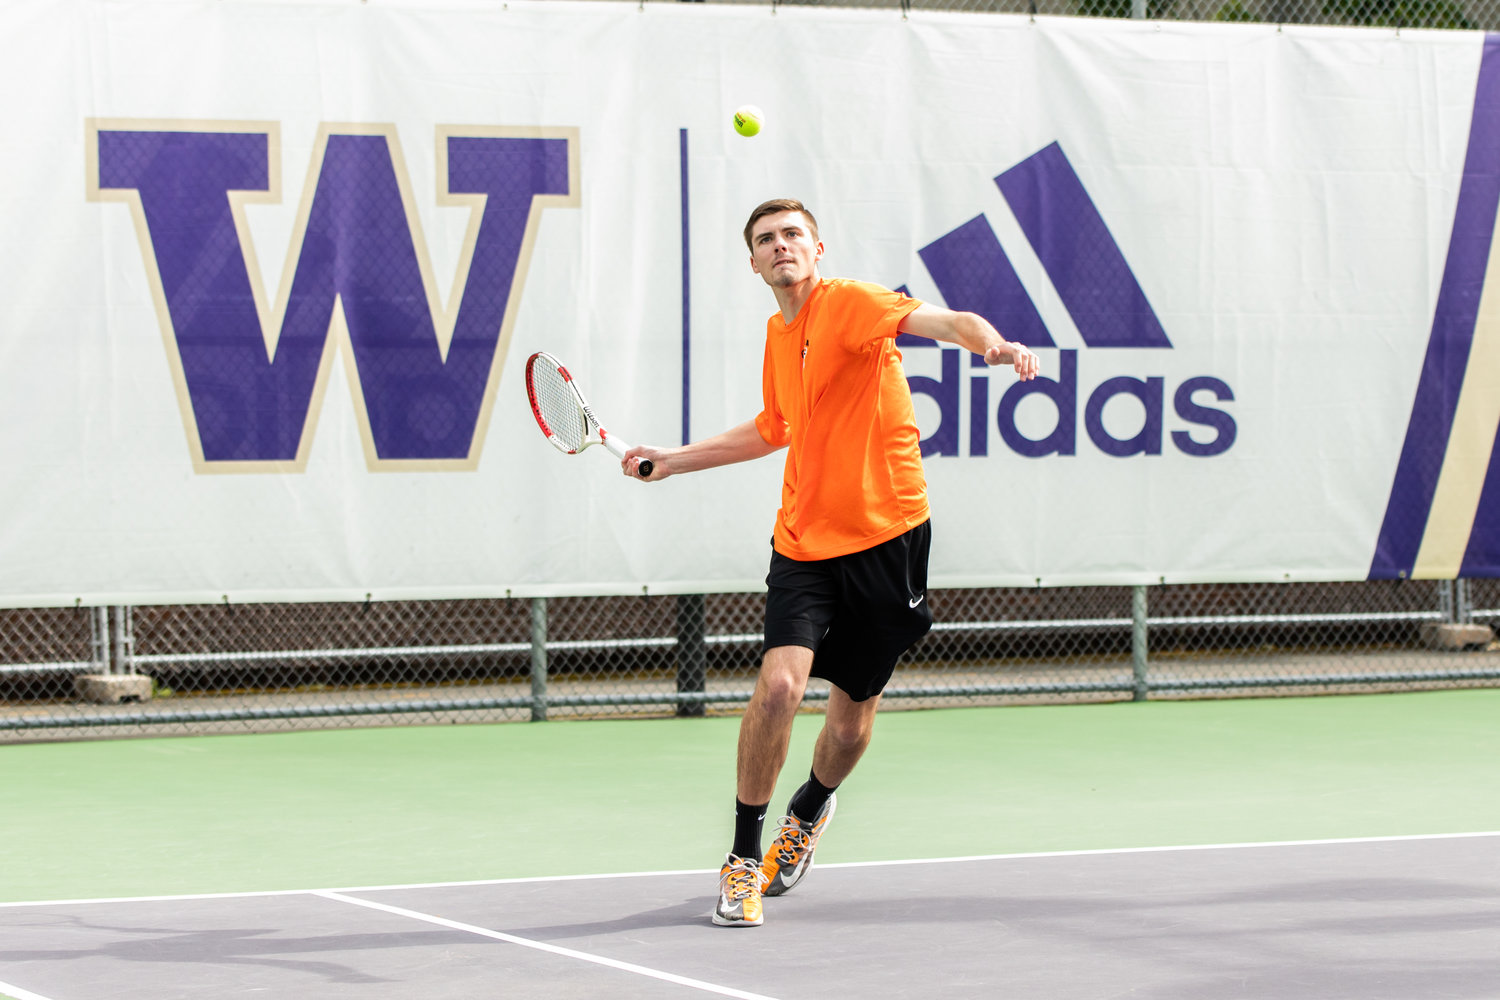 Centralia's Landon Kaut eyes the ball during the first set of the 2A boys' doubles tennis state competition on May 27, 2022.